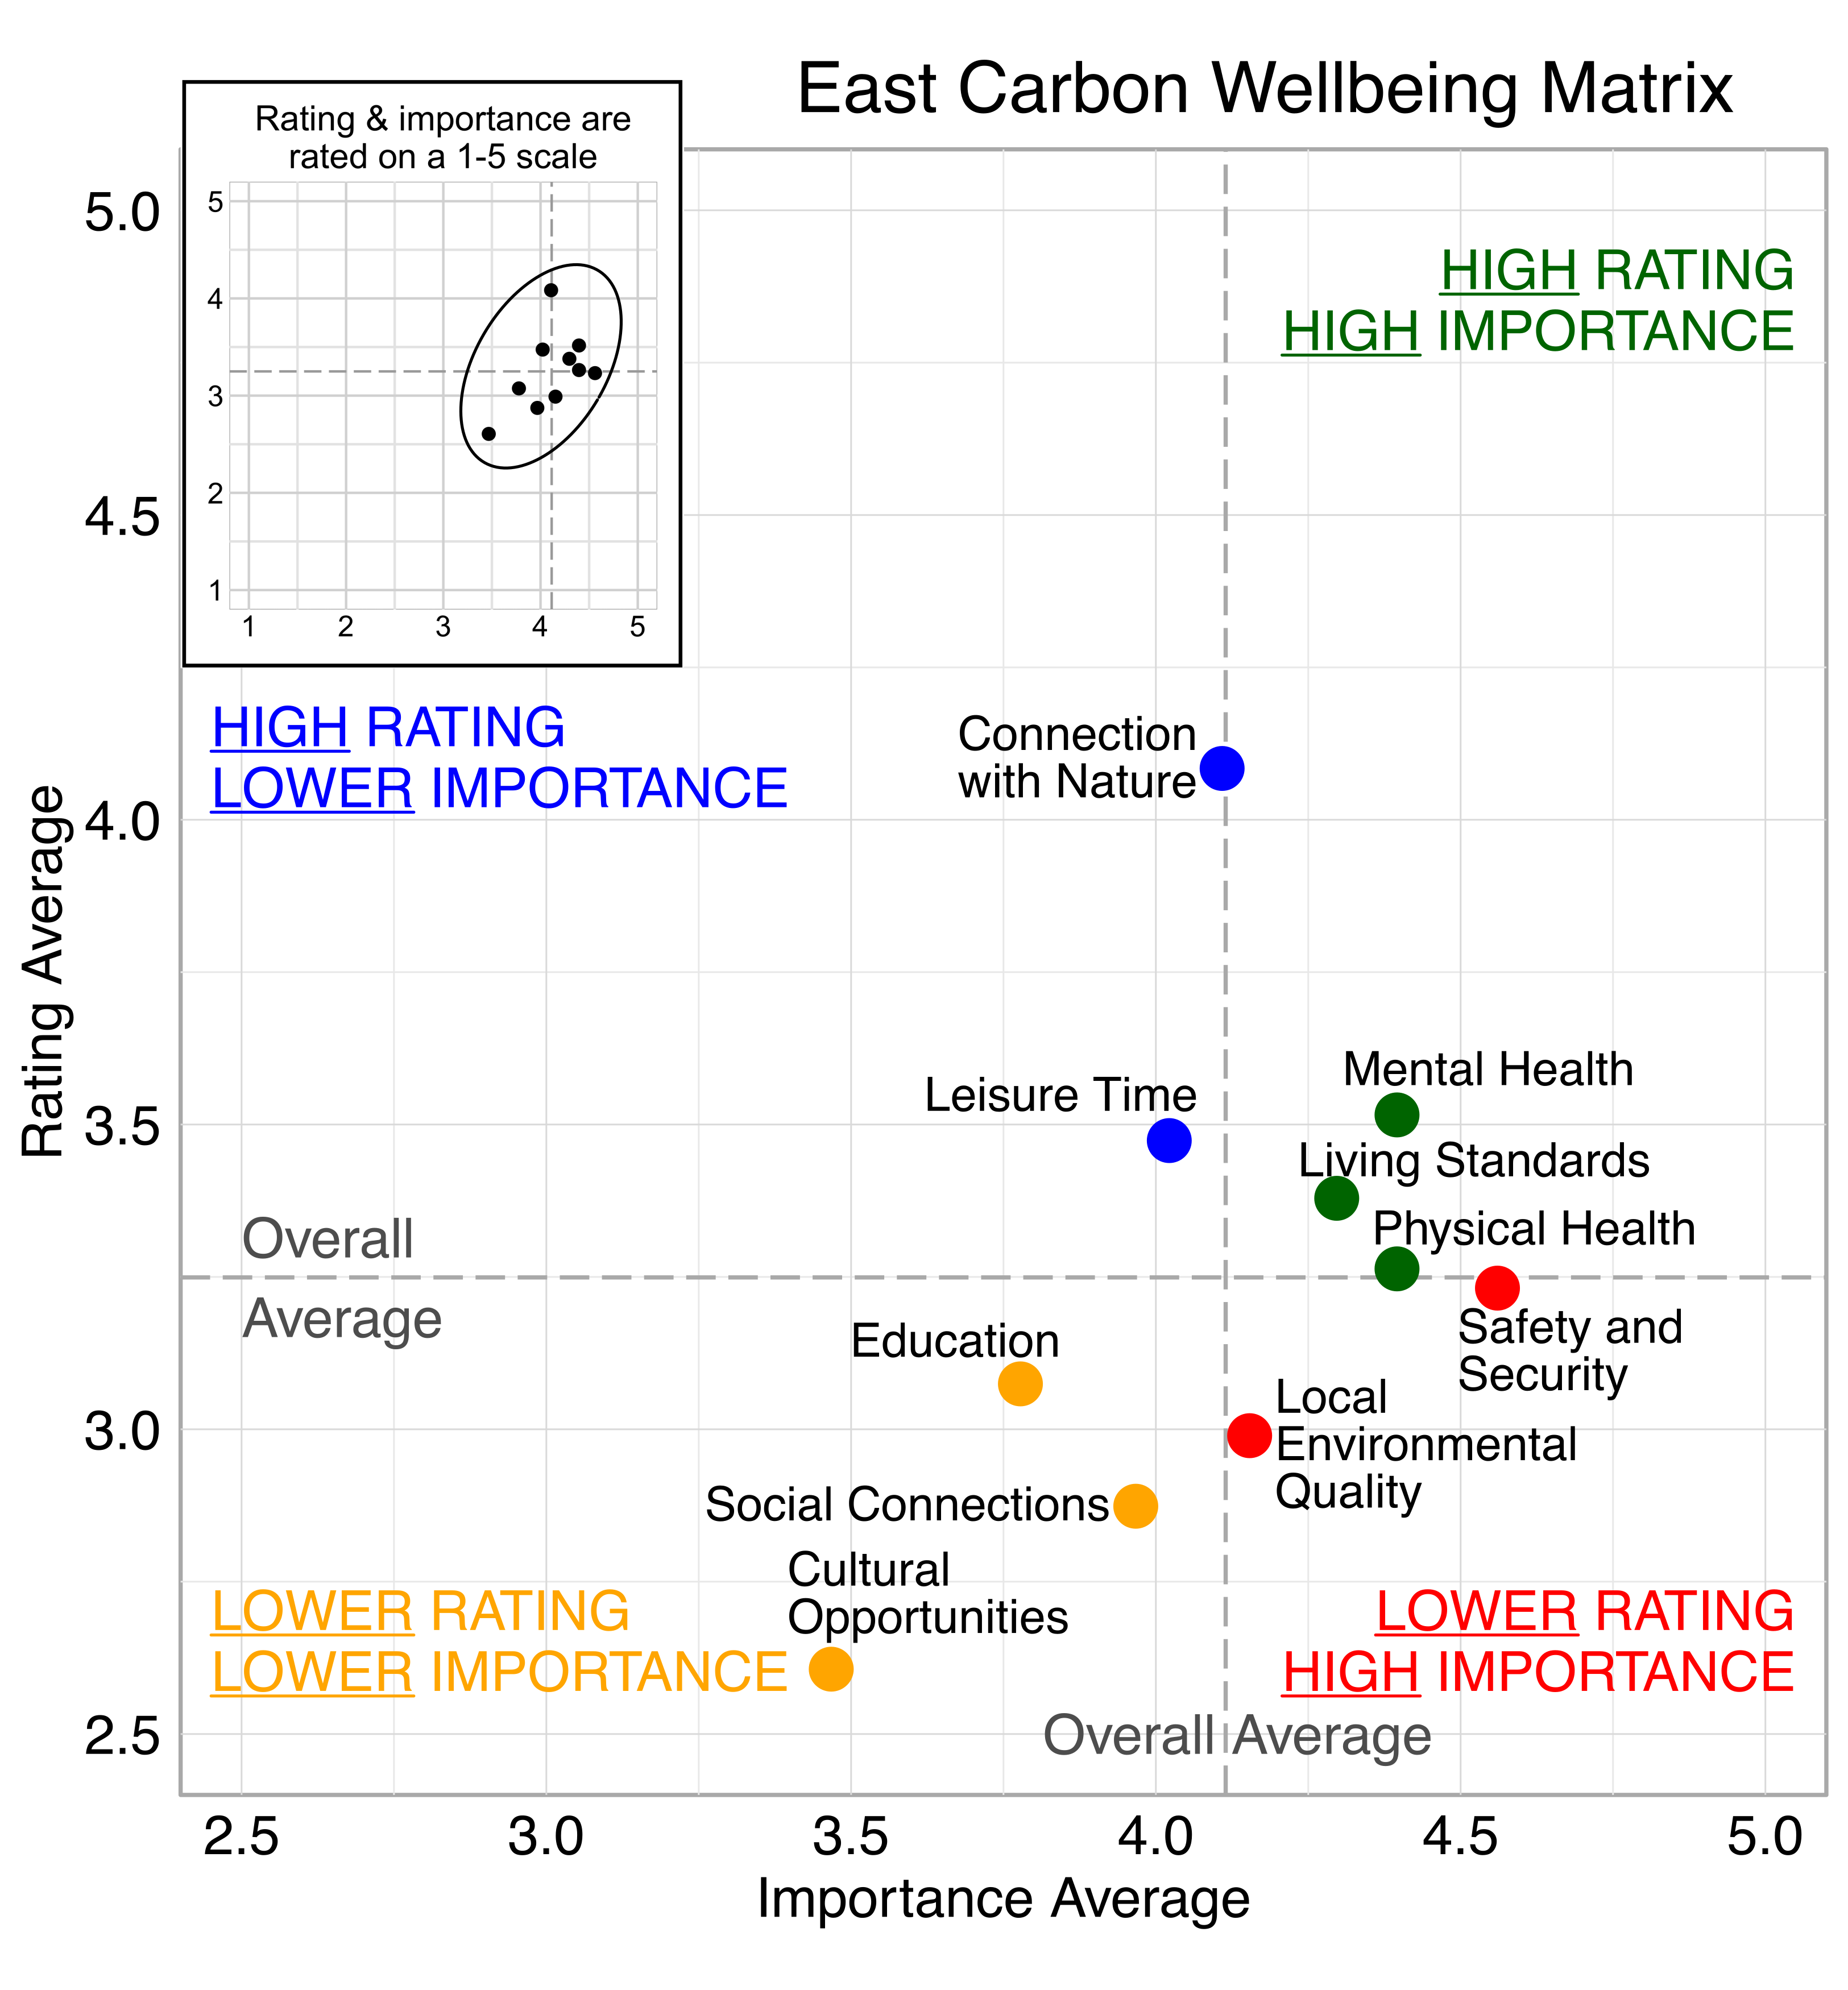 Scatterplot. Title: East Carbon Wellbeing Matrix. Domains are classified into four quadrants depending on their average rating and average importance as compared to the average of all the average domain ratings and the average of all the average domain importance ratings. High rating, high importance (green quadrant) domains include: Mental Health, Living Standard, and Physical Health. High rating, lower Importance (blue quadrant) domains include: Leisure time; Lower rating, lower importance (yellow quadrant) domains include: Education, Social Connections, Cultural opportunities. Lower rating, high importance (red quadrant) domains include: Safety and Security, Local Environmental Quality.